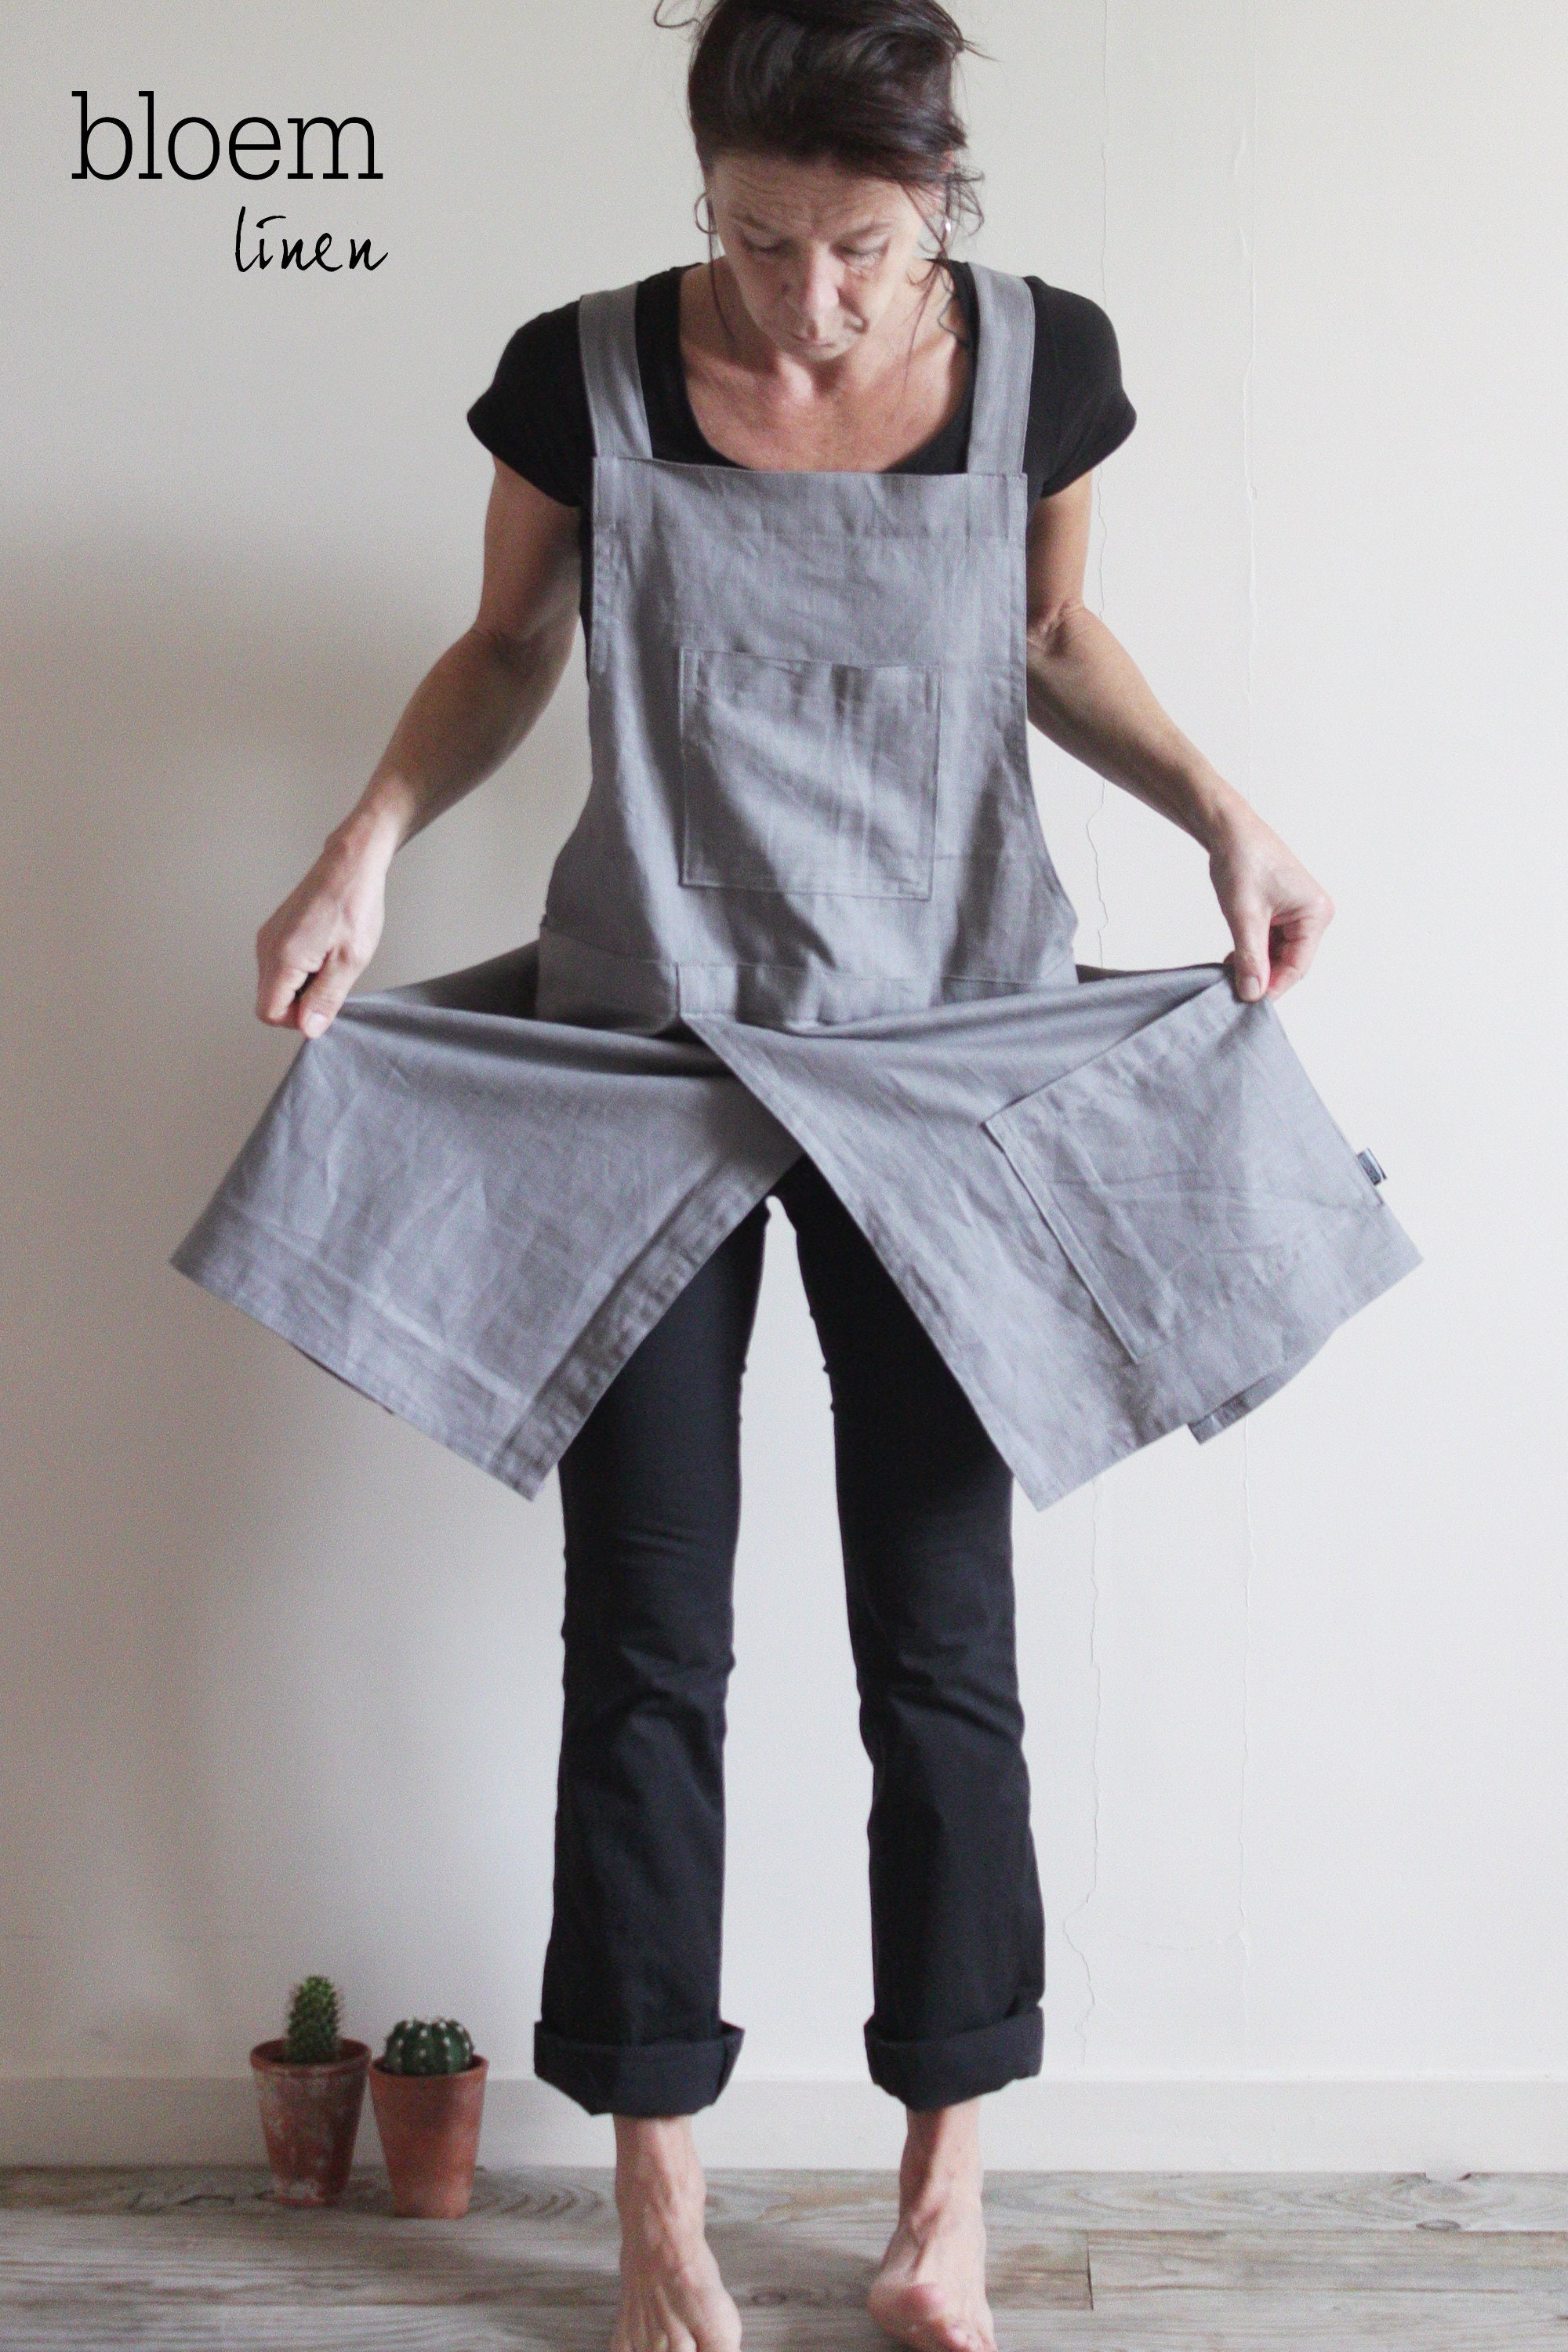 Pottery Apron With Split Leg and Pockets for Pottery Tools. Perfect for  Working With Clay Made With Canvas Material in Light Grey. 